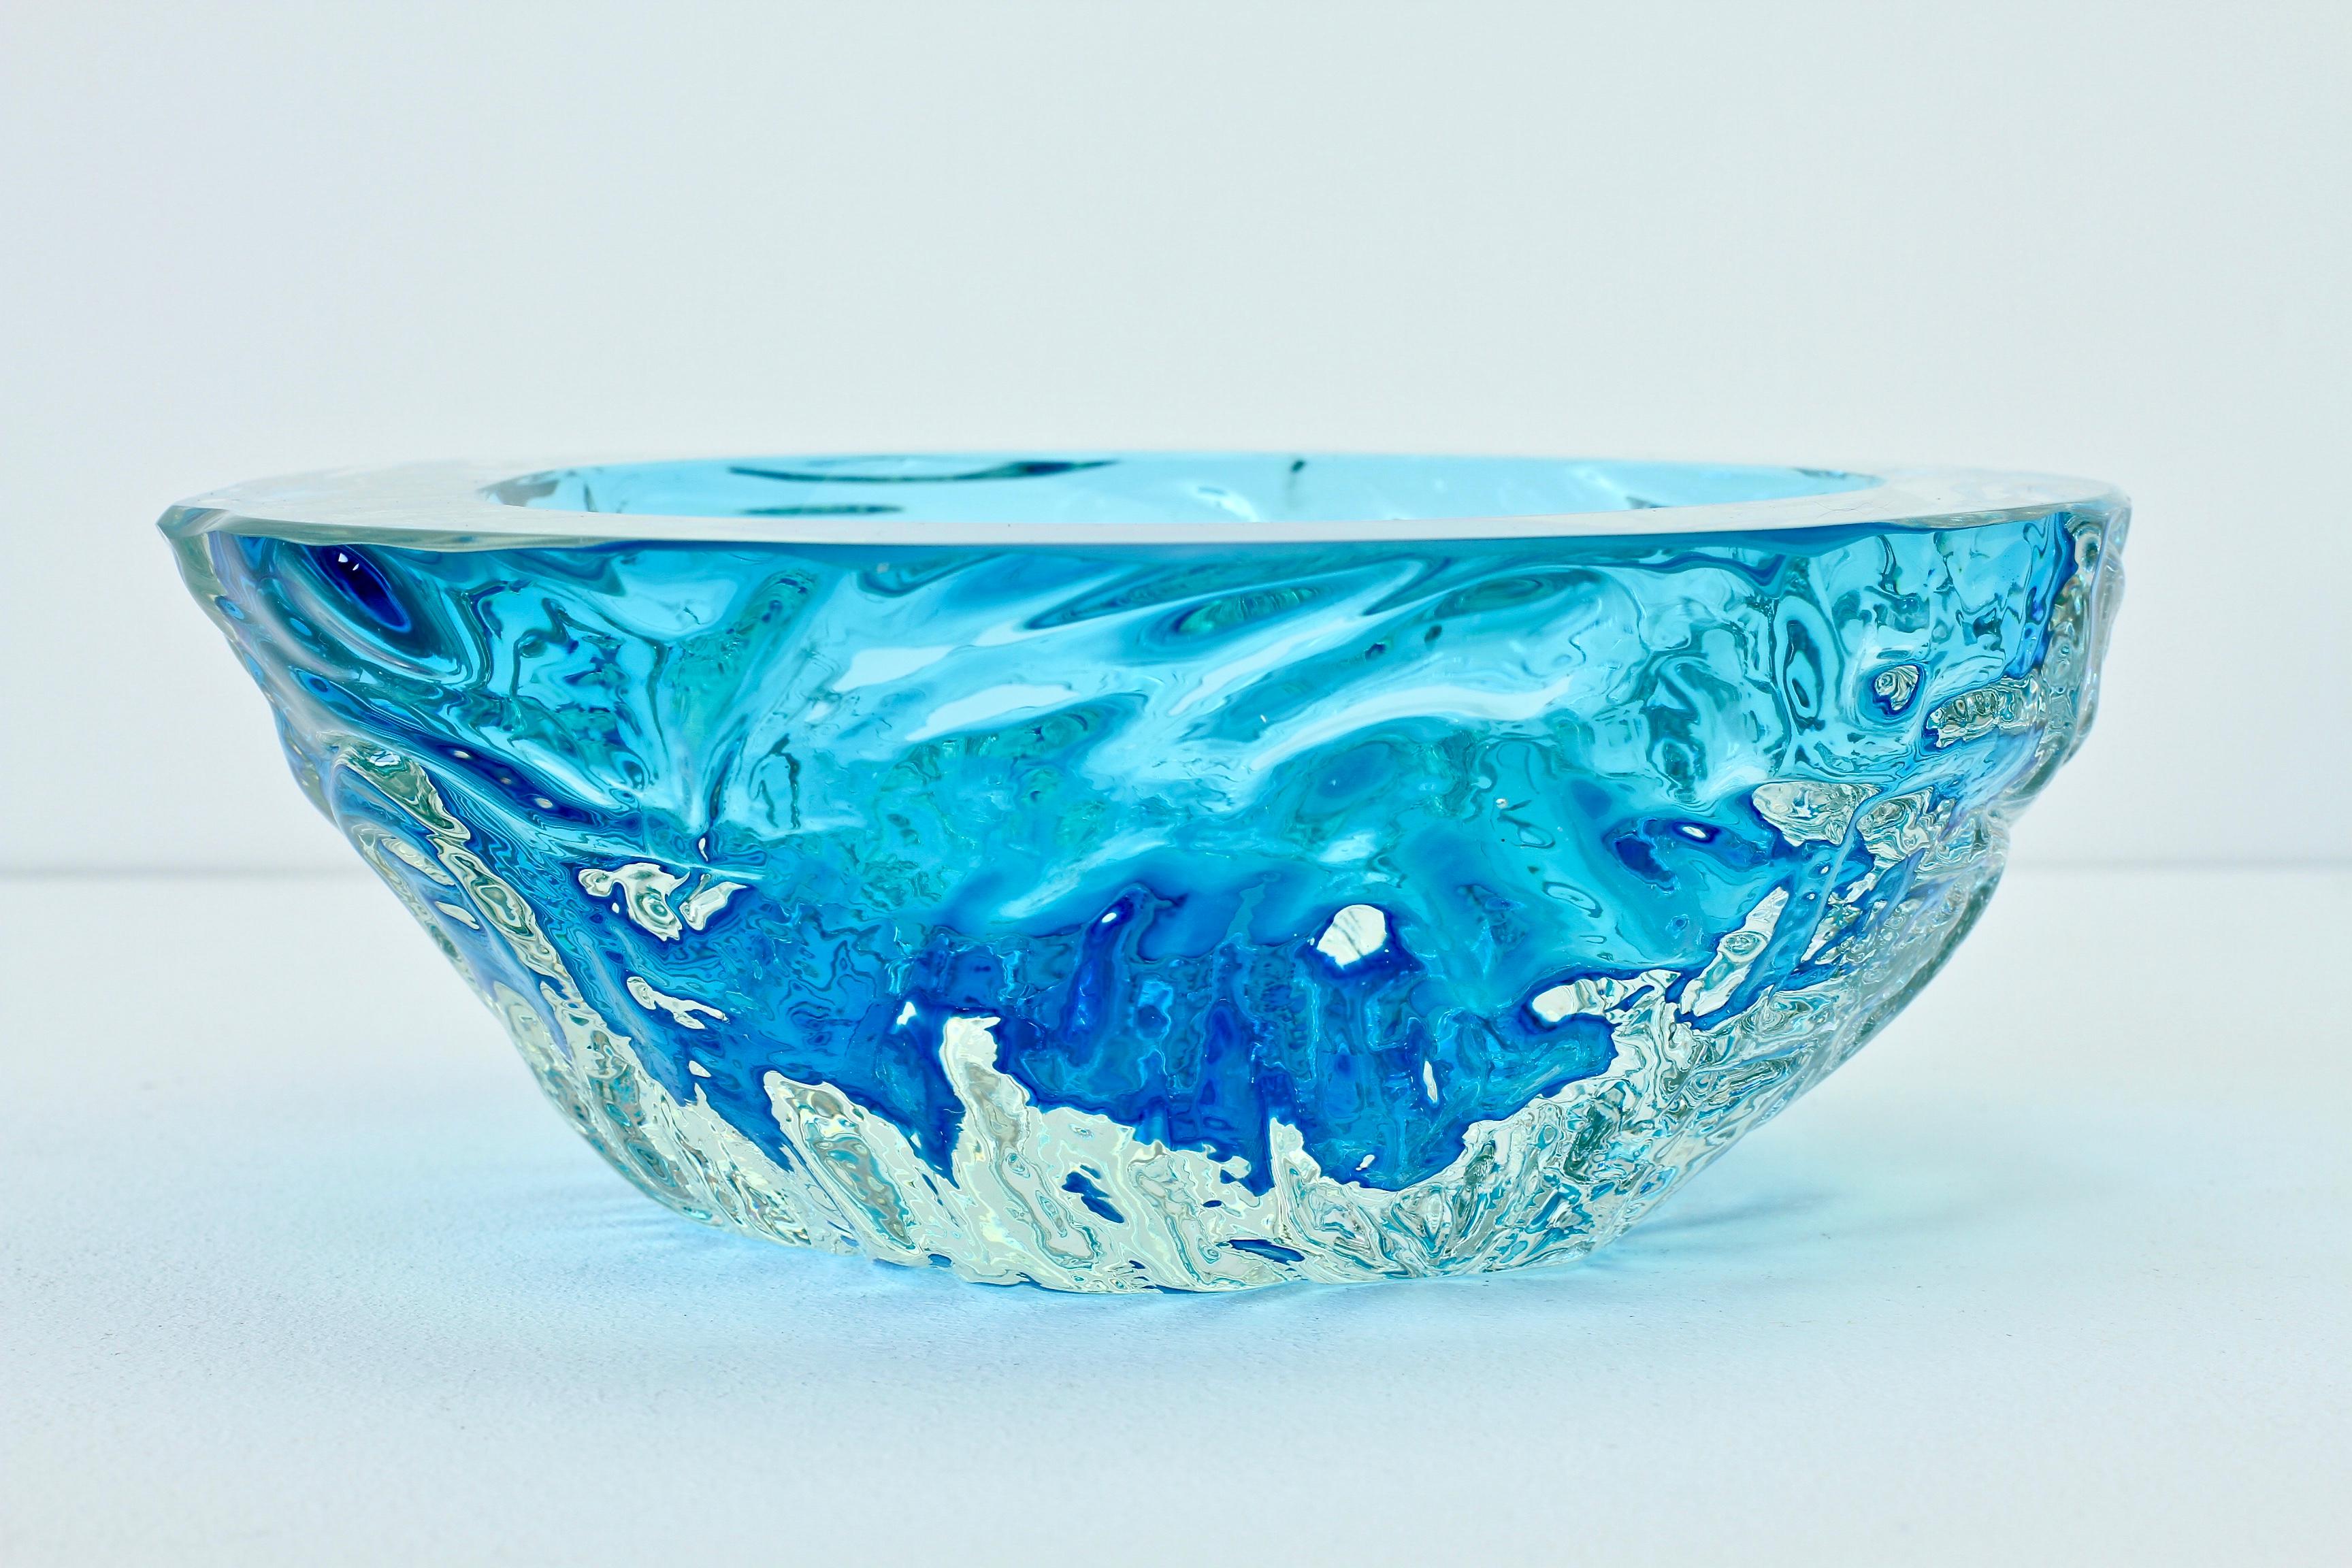 Blown Glass Midcentury Modern Large Italian Blue 'Sommerso' Murano Glass Bowl, Seguso attri. For Sale